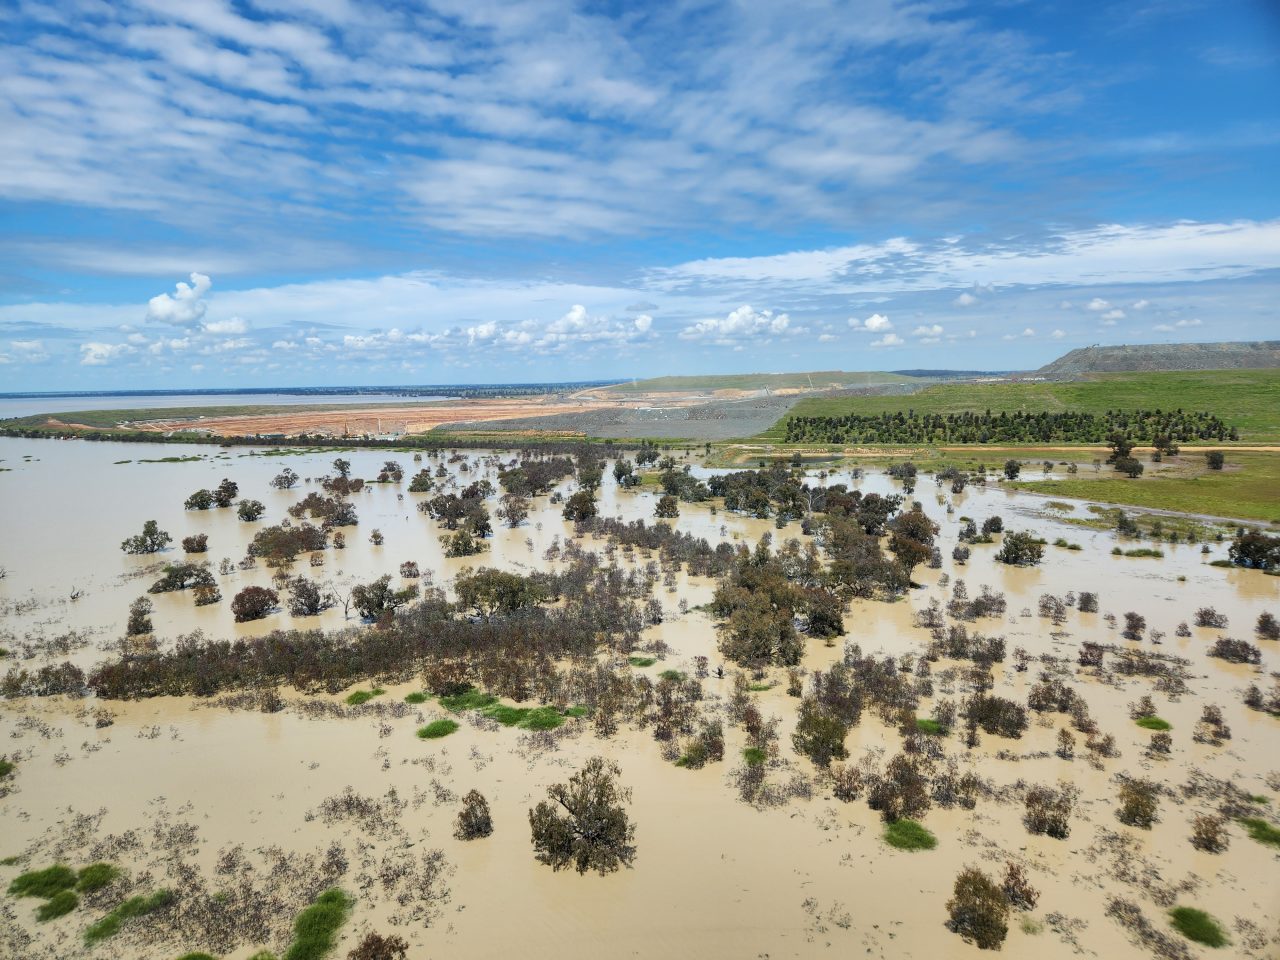 Aerial photo of inundated floodplain that has redgum trees  also being inundated. The water is brown, The sky is blue.